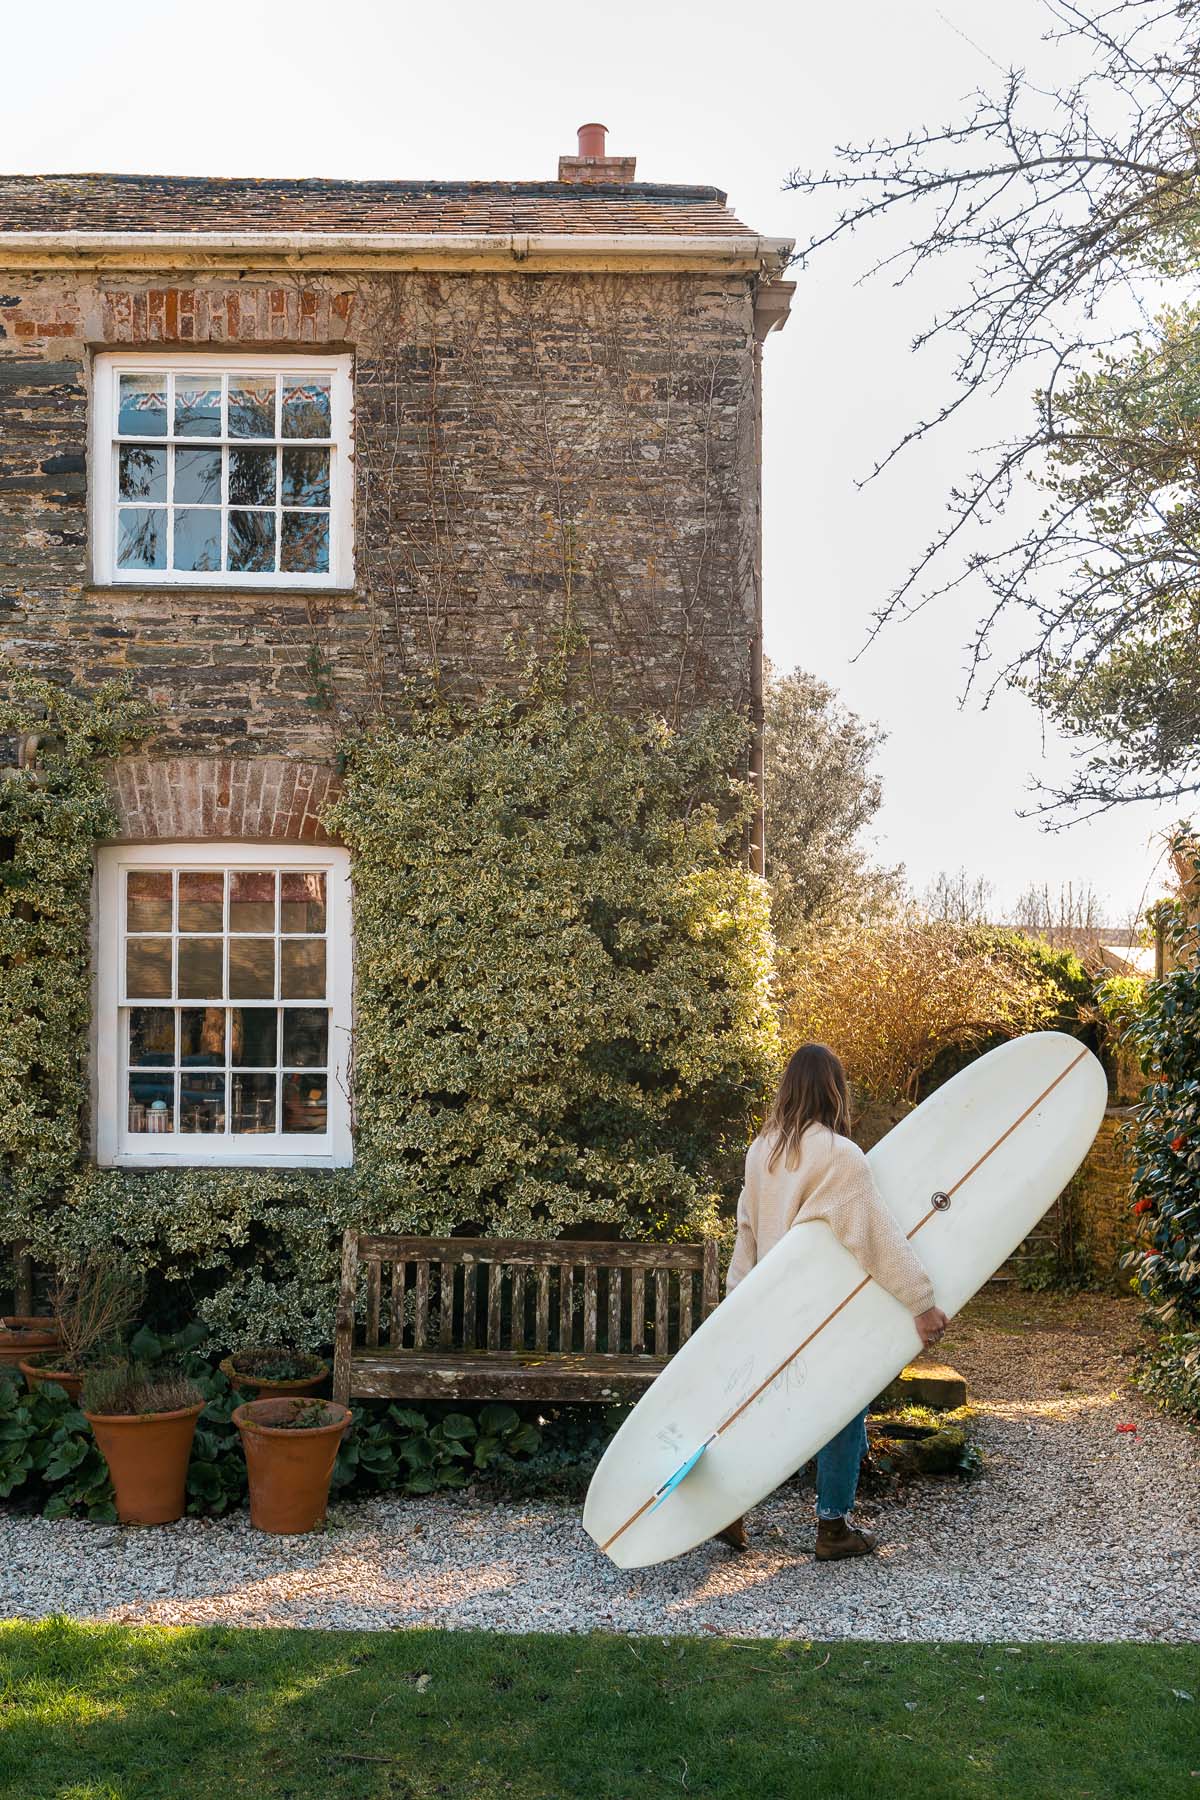 Exterior shot of house with girl carrying surfboard